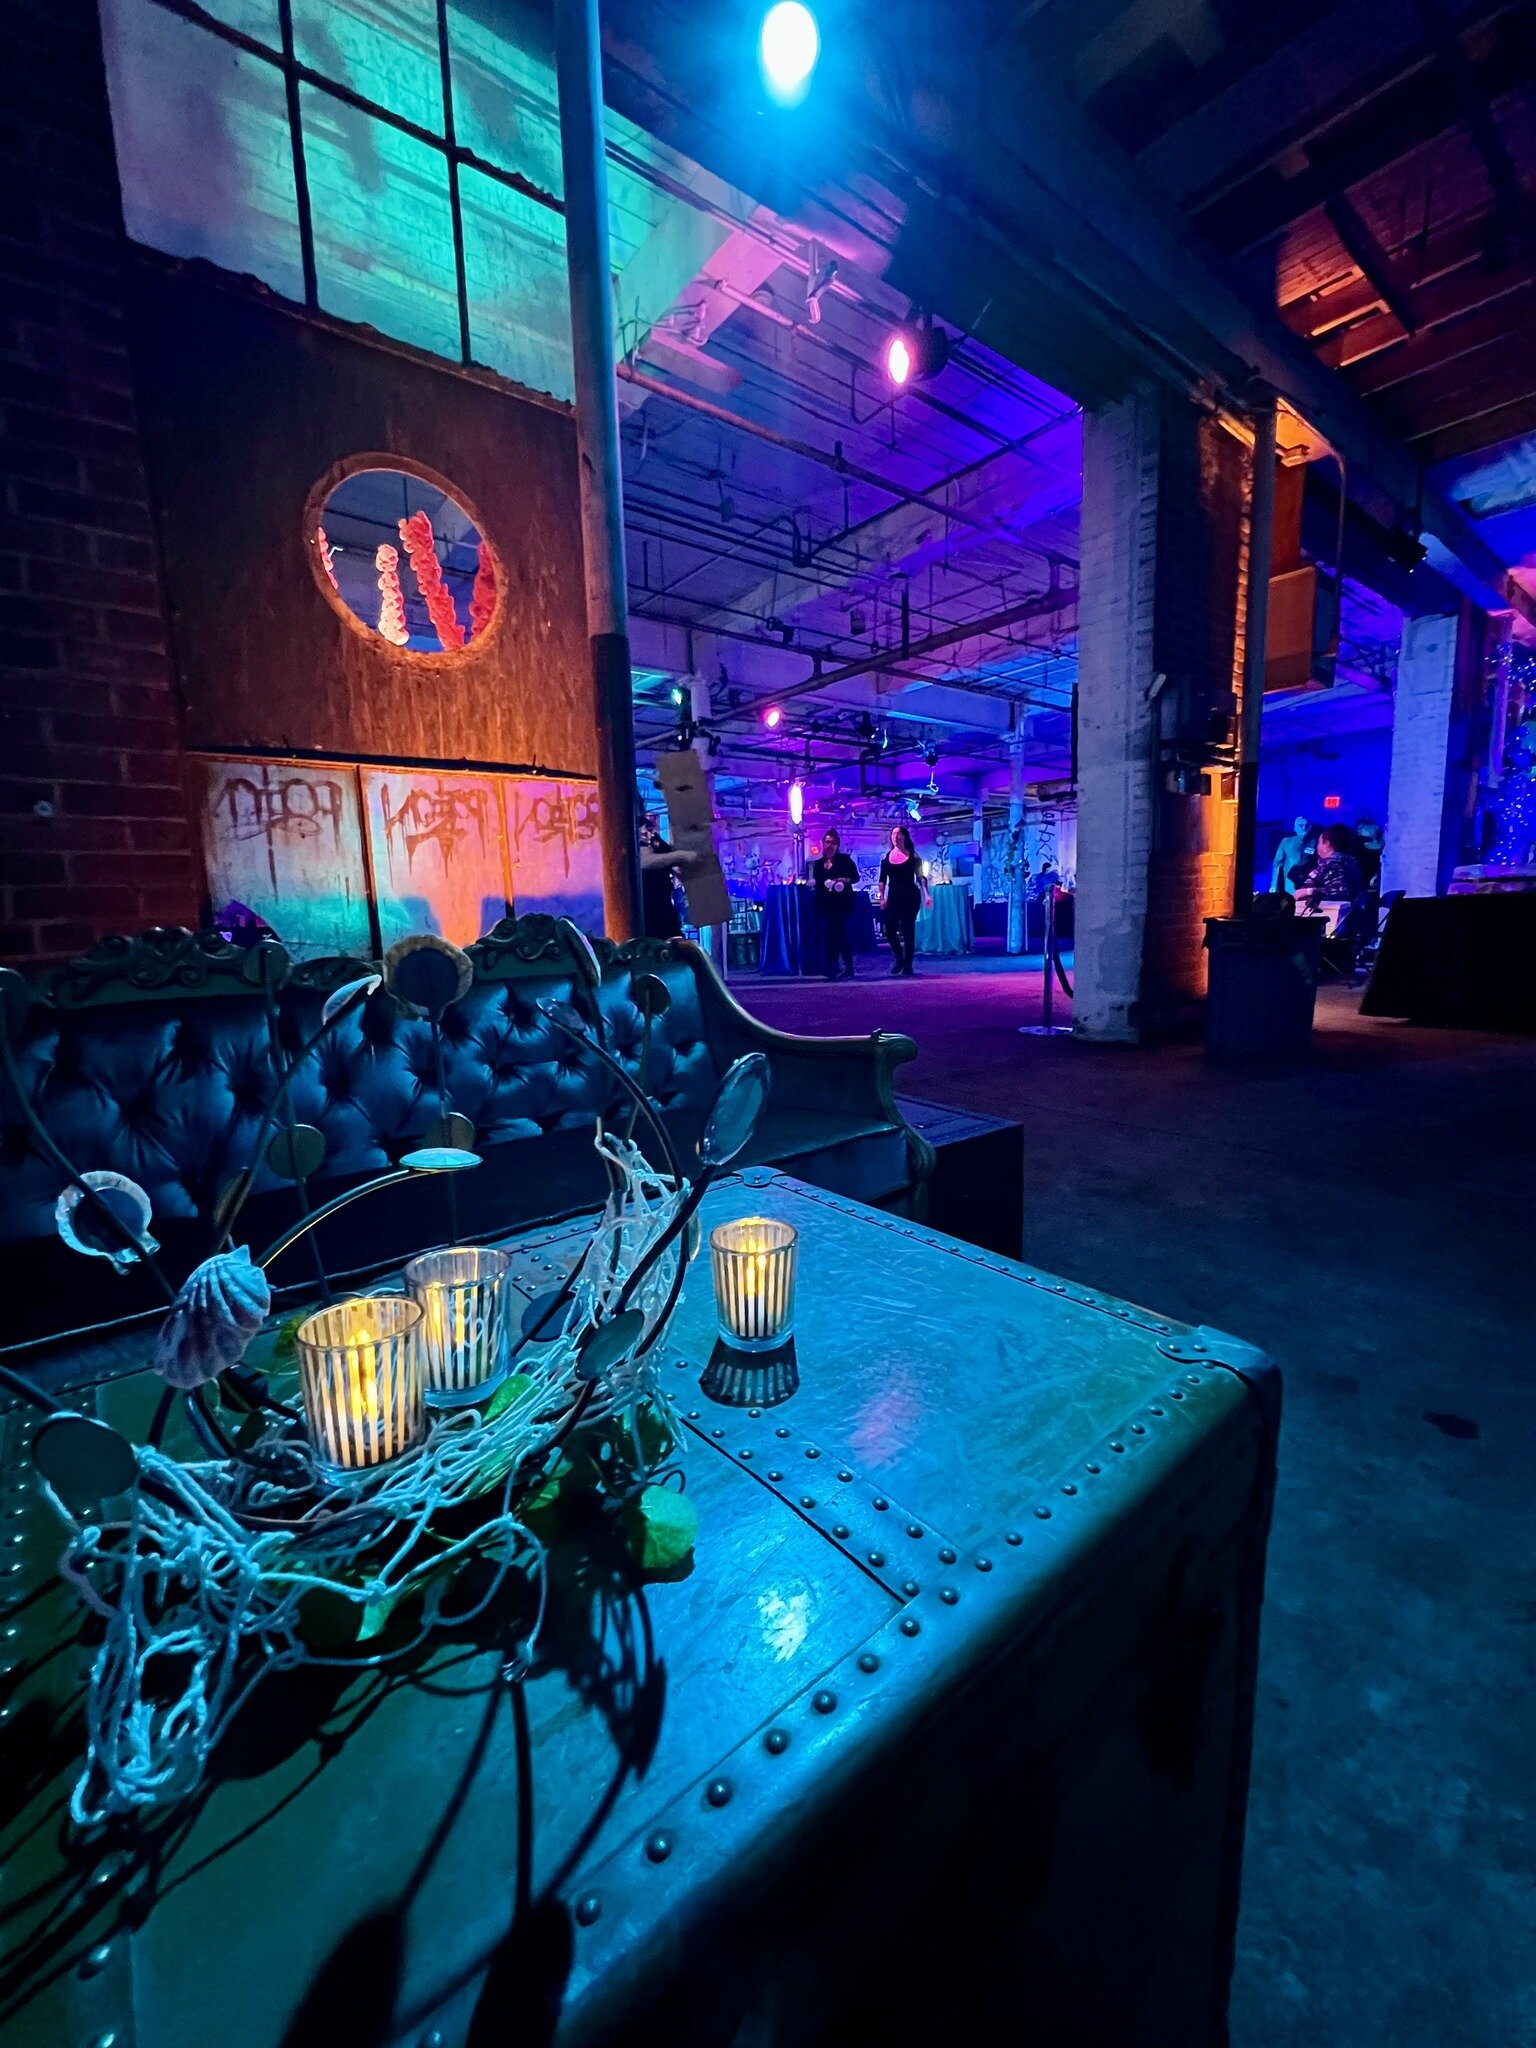 A few weeks ago High Output provided generators, heat, lighting, and audio for @pvdpreservation's Gala. Our staff and equipment was able to bring the gala&rsquo;s theme of &ldquo;Under the Sea&rdquo; to a whole new level- completely transforming the 